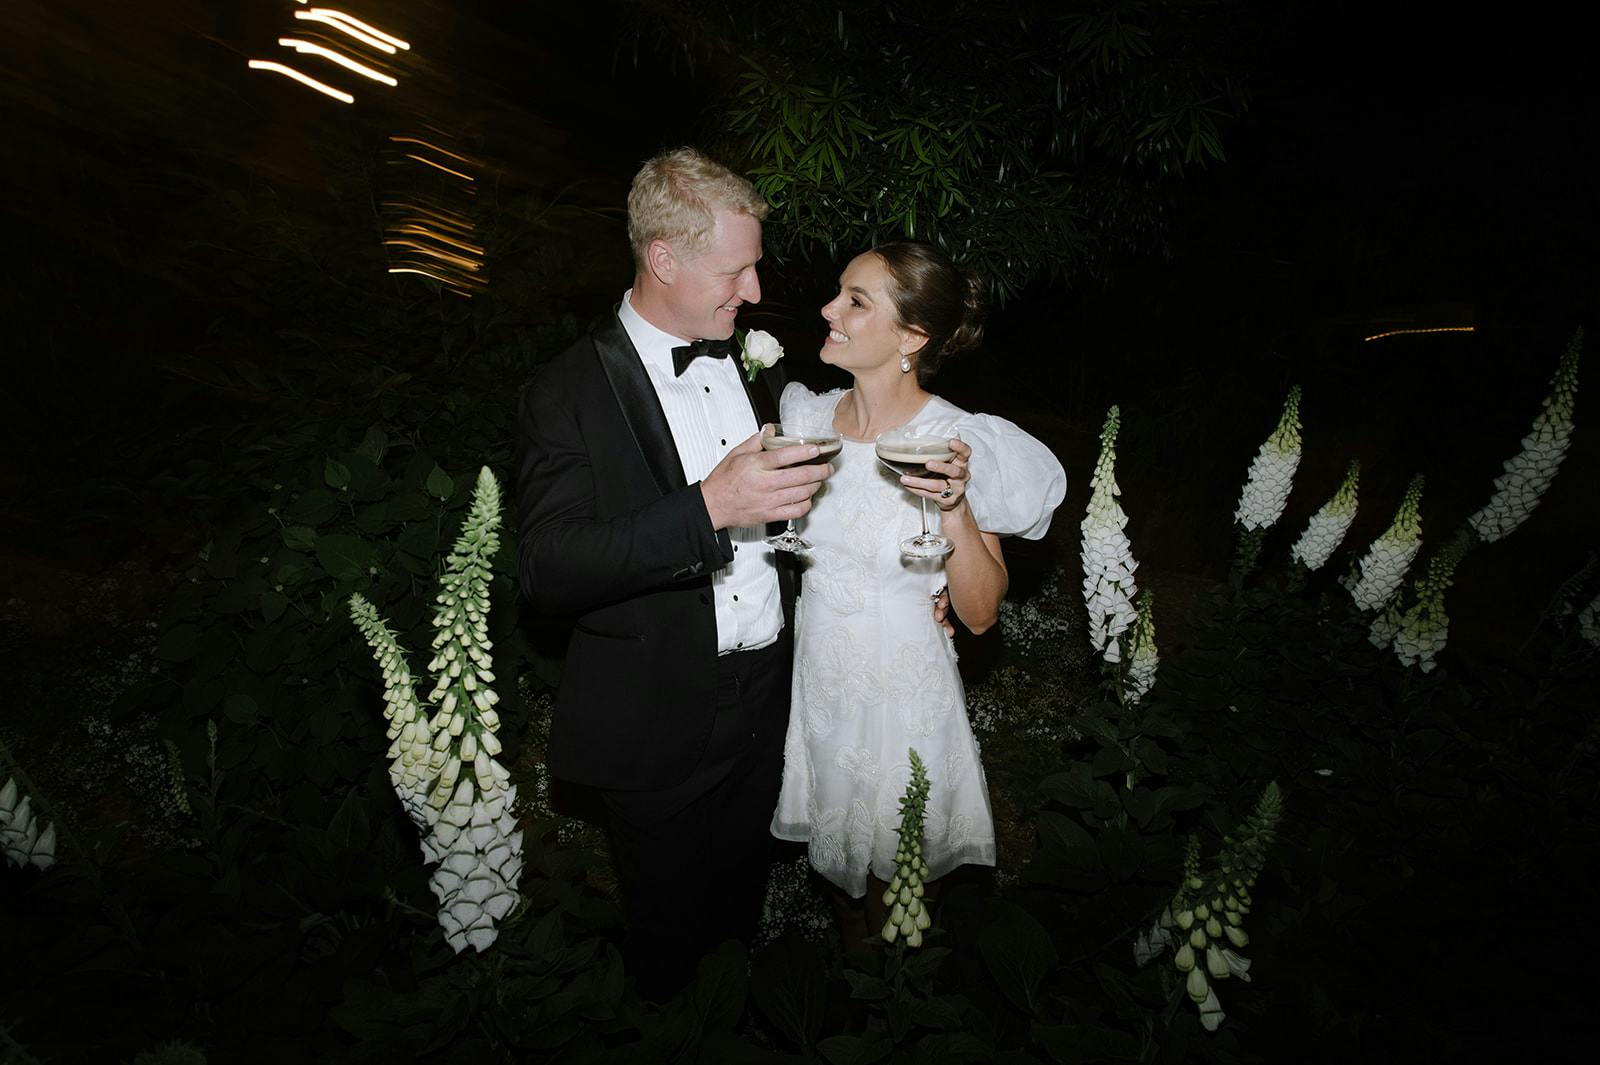 A couple, dressed elegantly in a black tuxedo and a short white dress, smile at each other while holding up champagne glasses. They stand amidst tall, white flowers at night, with blurred lights in the background adding a romantic glow to the scene.